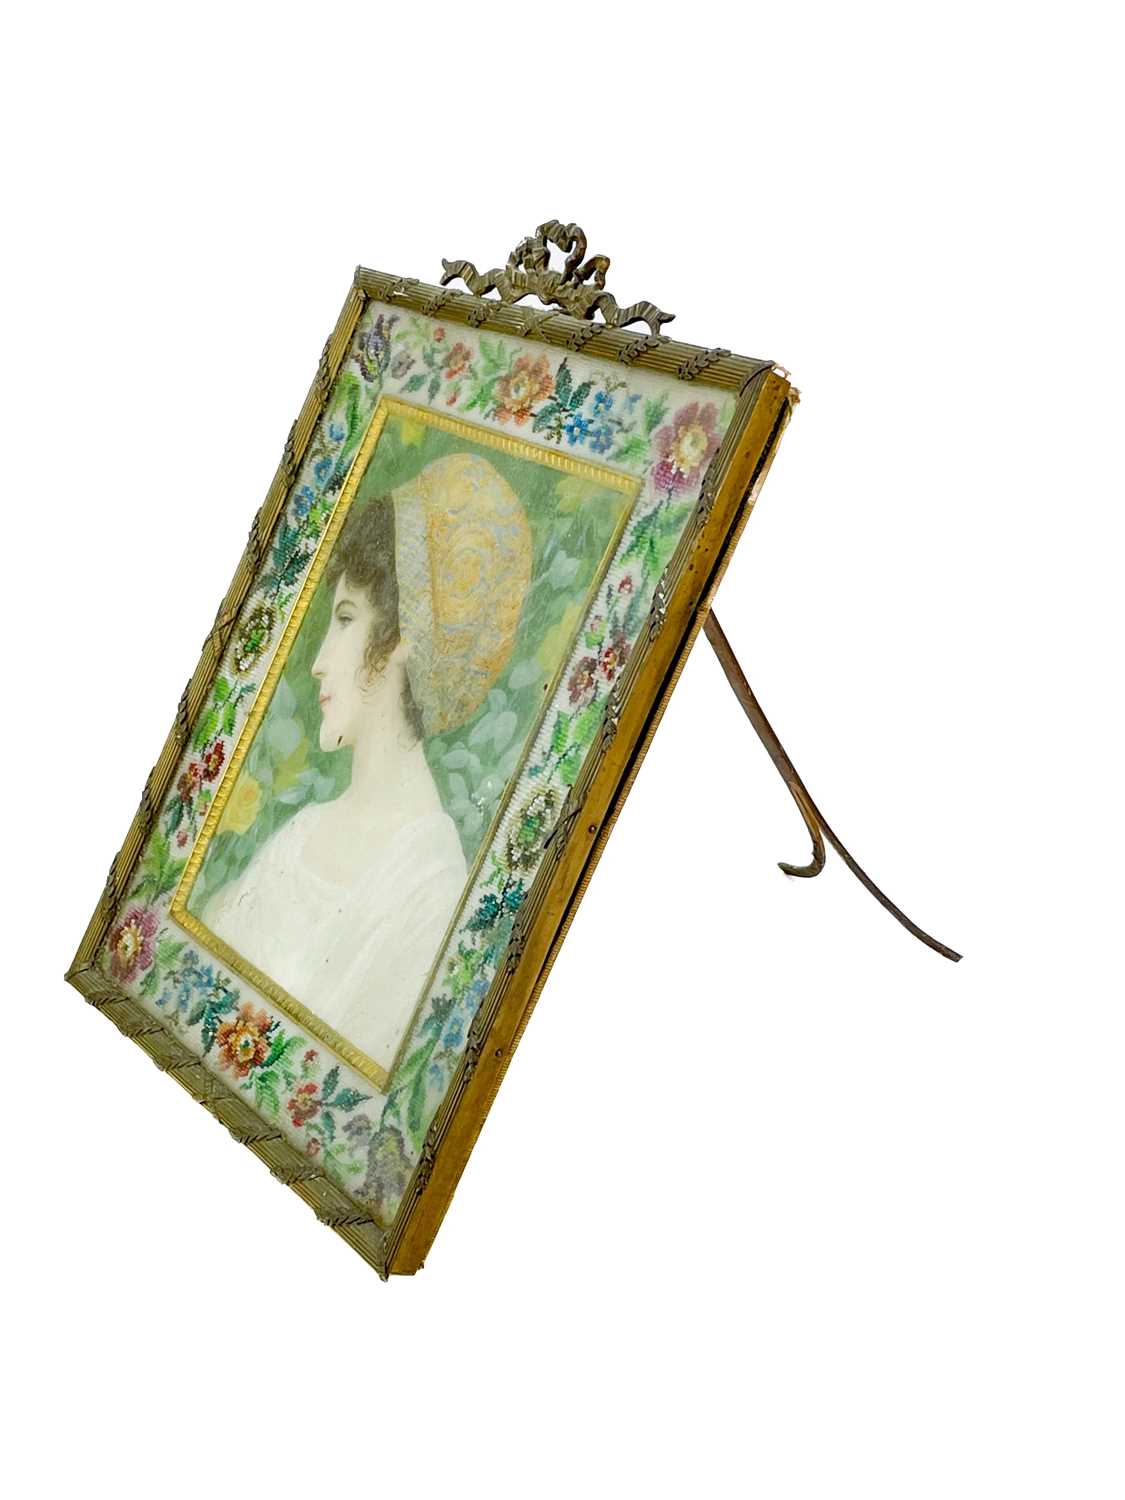 An early 20th century Regency style gilt metal frame. - Image 6 of 12